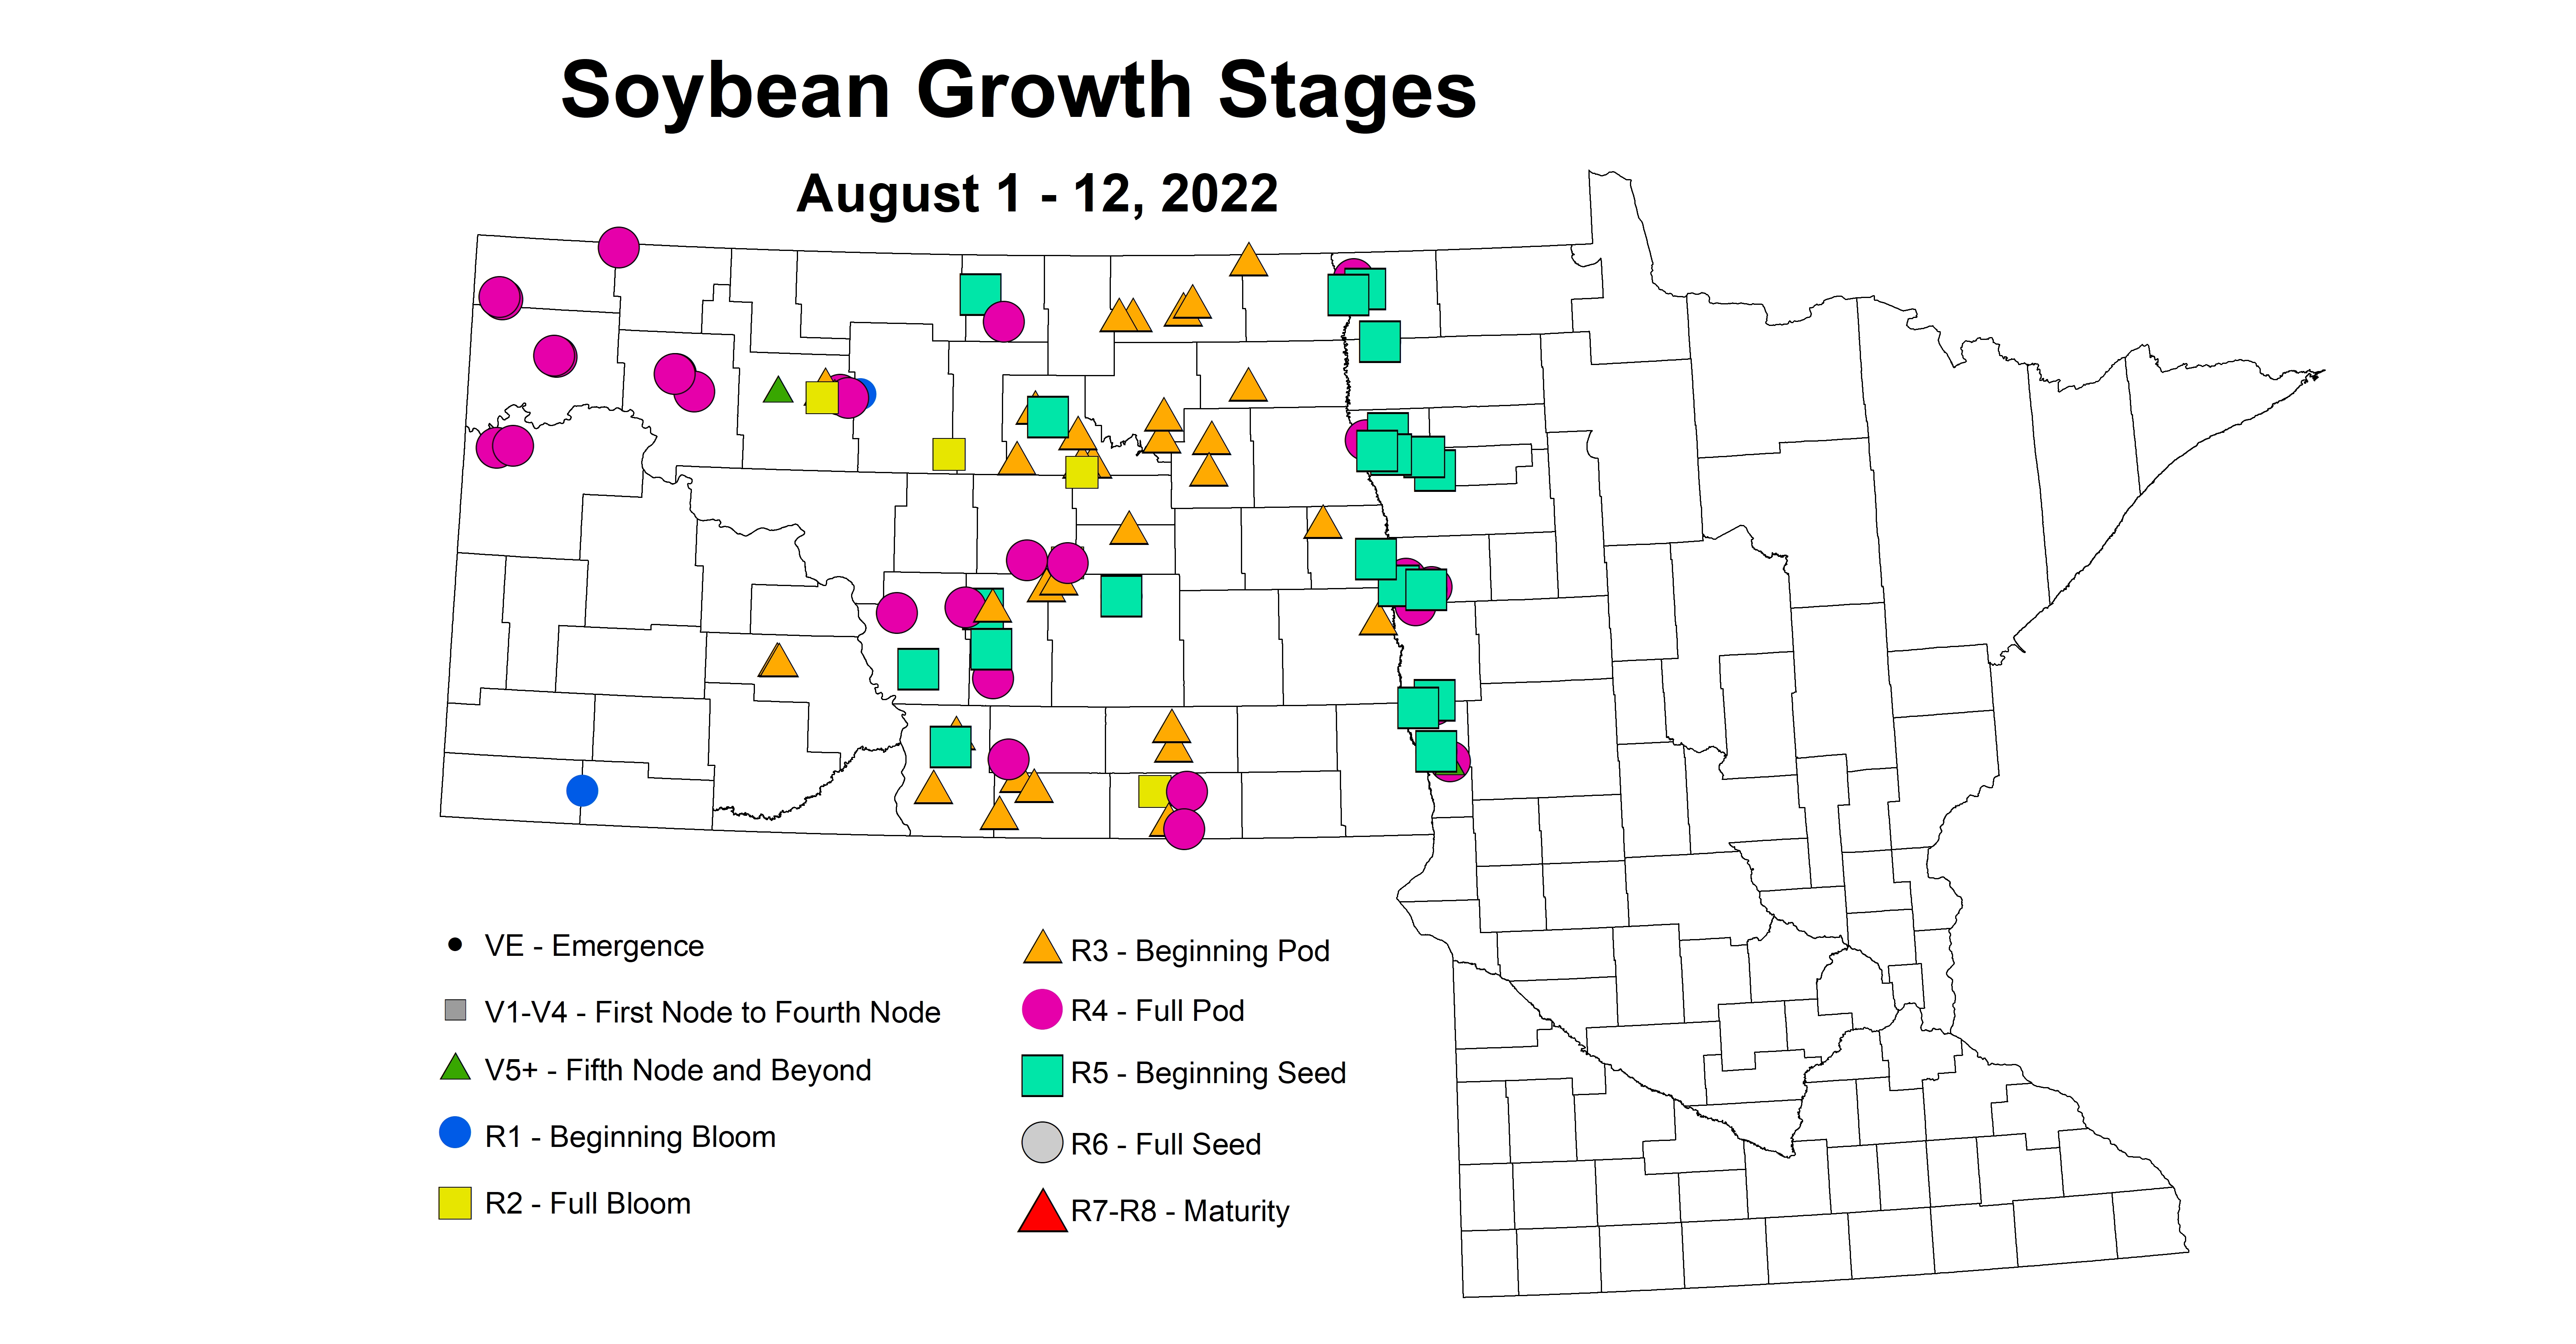 soybean growth stages 2022 8.1-8.12